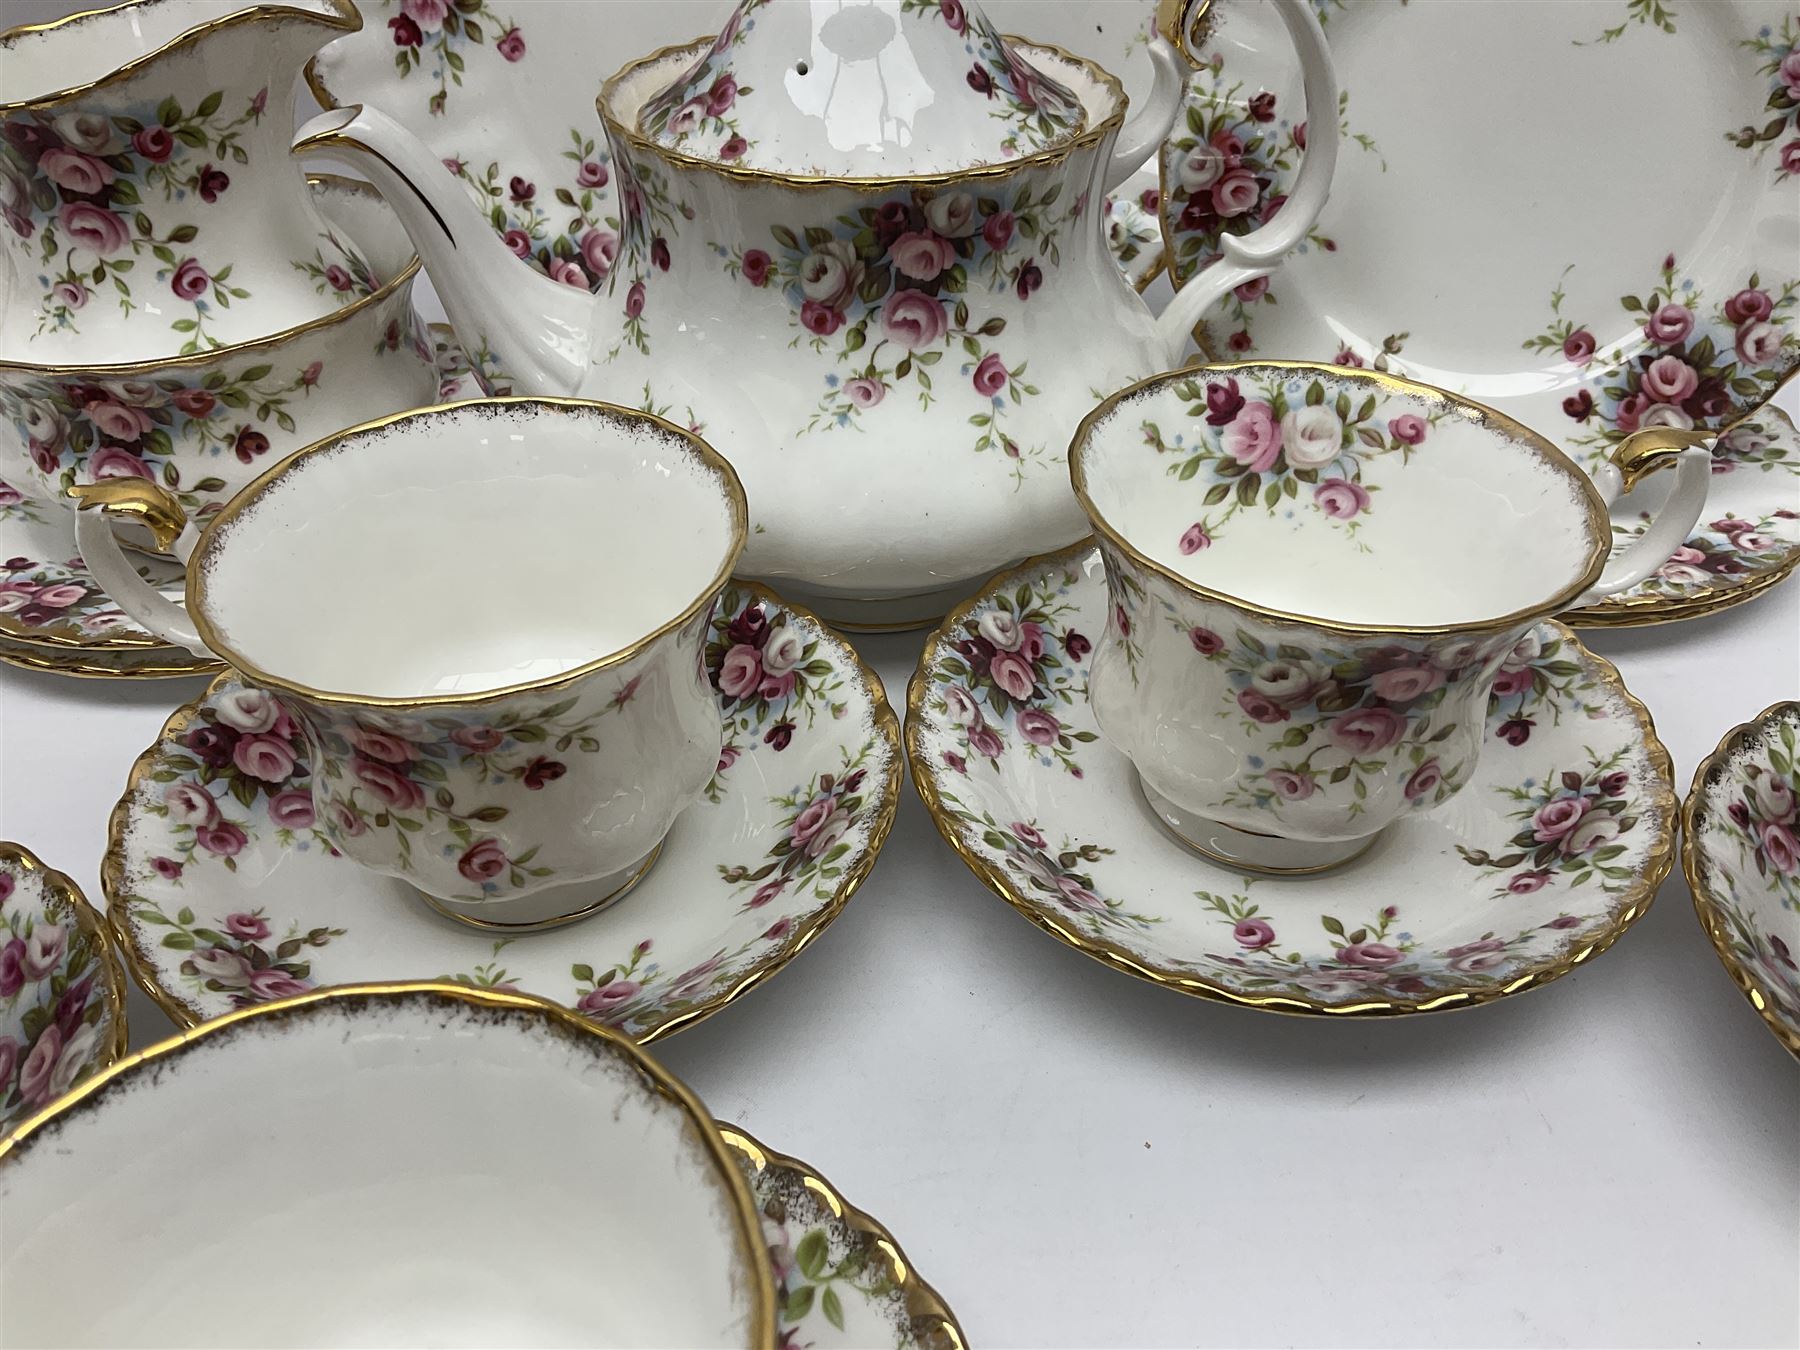 Royal Albert Cottage Garden pattern tea service for six people - Image 5 of 10